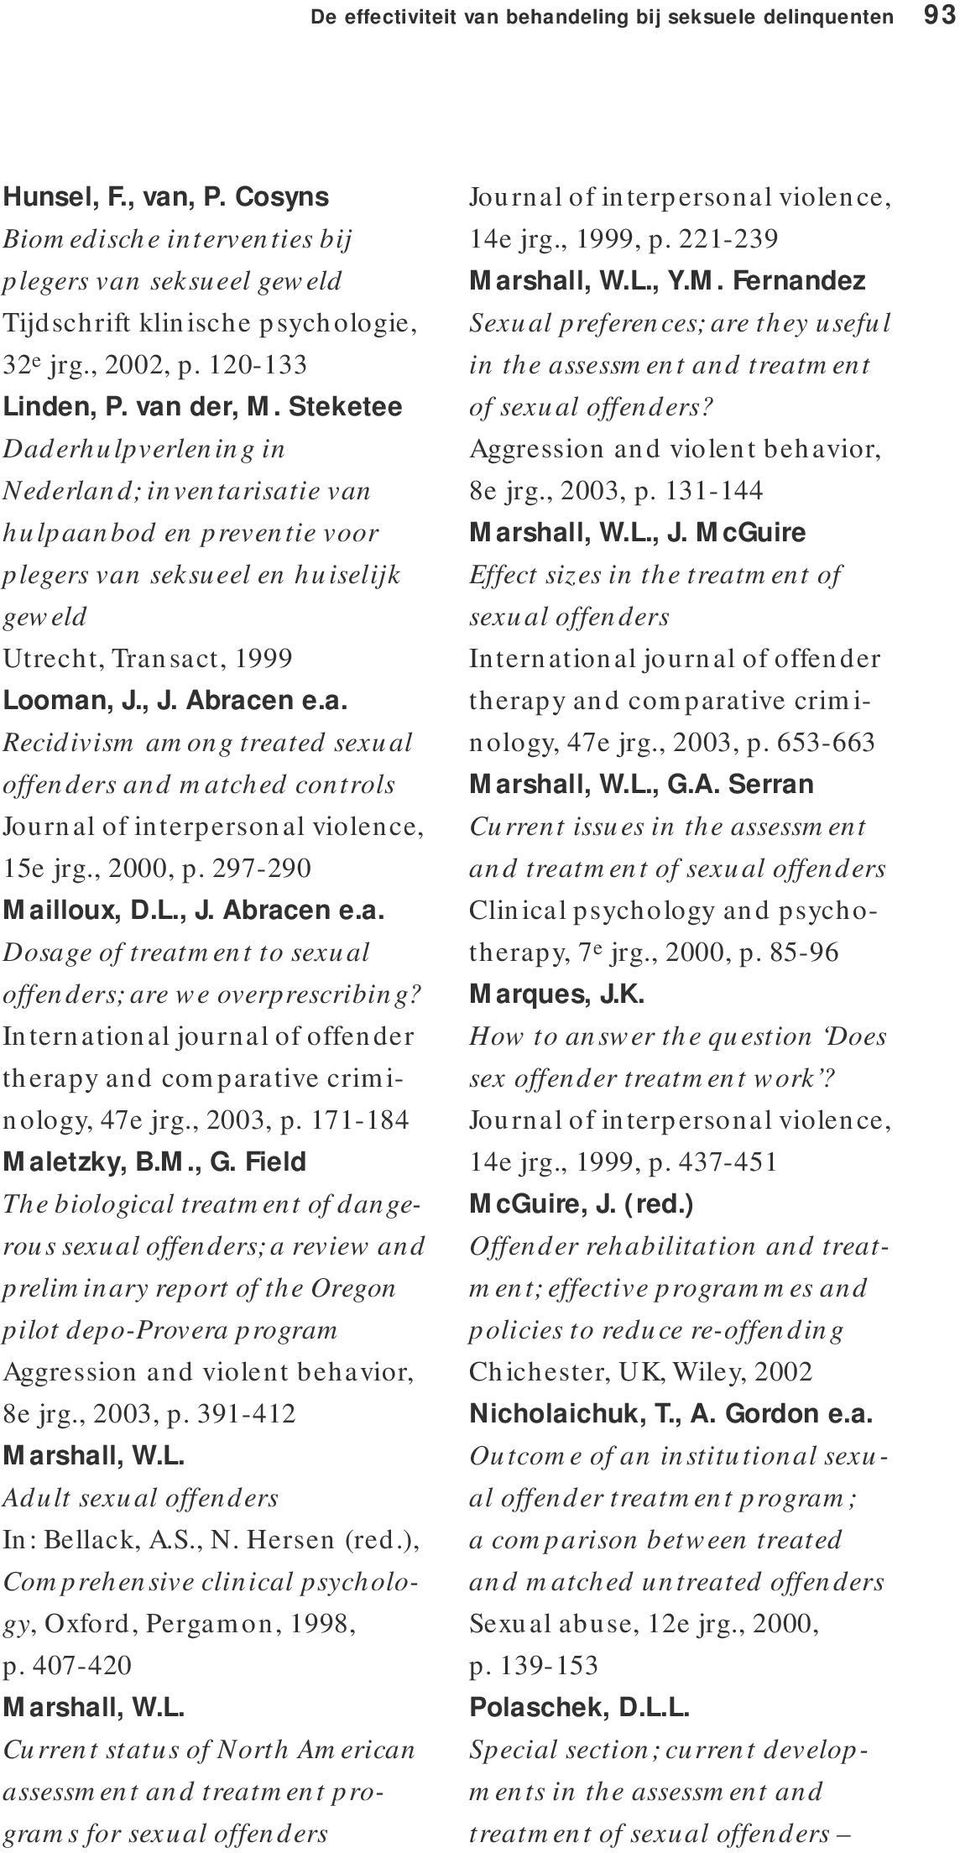 , J. Abracen e.a. Recidivism among treated sexual offenders and matched controls Journal of interpersonal violence, 15e jrg., 2000, p. 297-290 Mailloux, D.L., J. Abracen e.a. Dosage of treatment to sexual offenders; are we overprescribing?